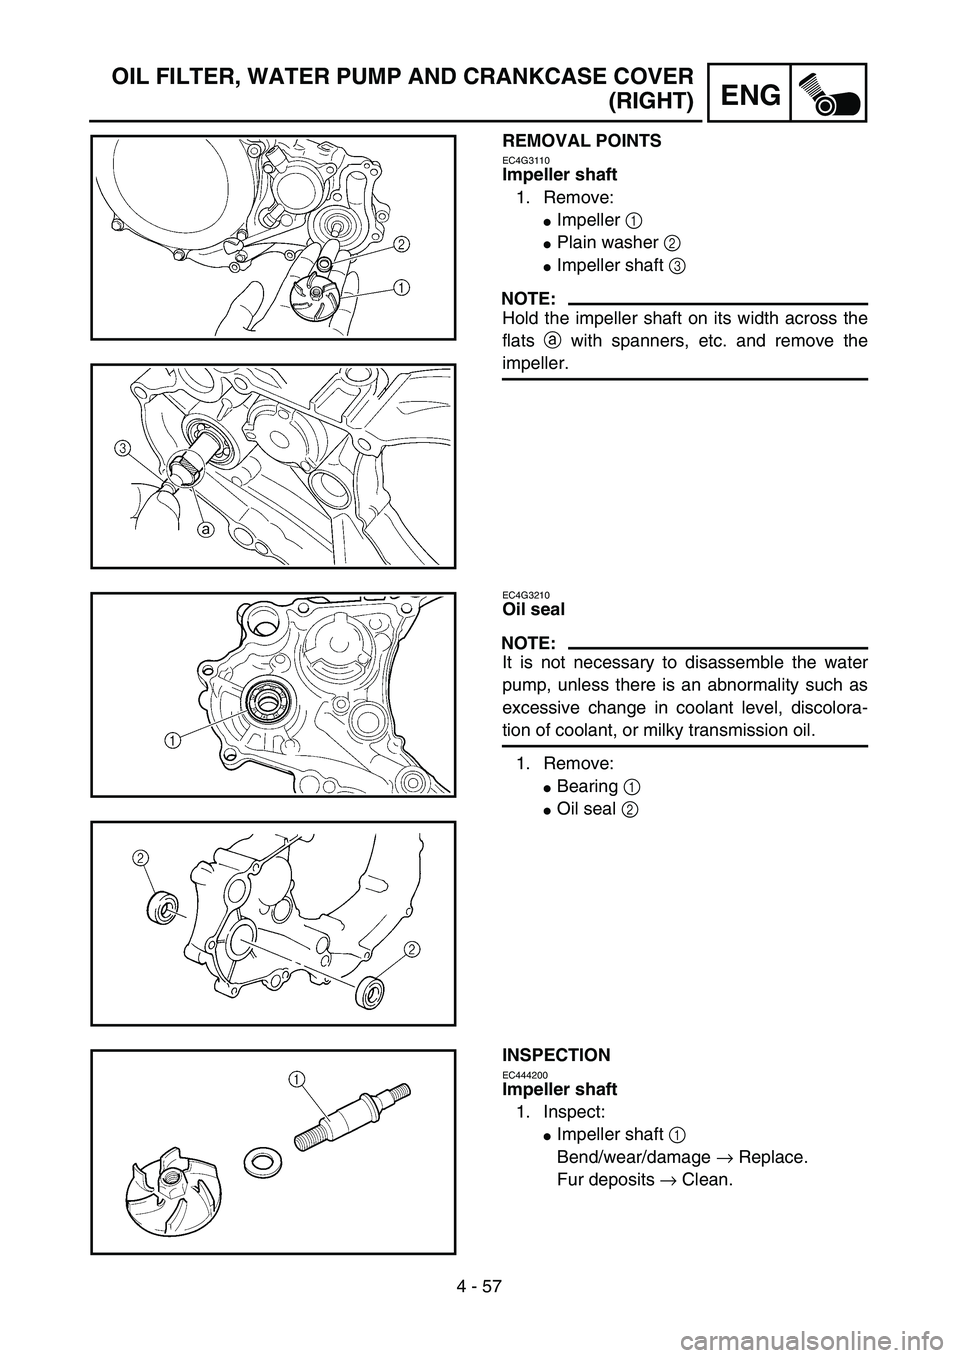 YAMAHA WR 450F 2004  Owners Manual 4 - 57
ENG
OIL FILTER, WATER PUMP AND CRANKCASE COVER
(RIGHT)
REMOVAL POINTS
EC4G3110
Impeller shaft
1. Remove:
Impeller 1 
Plain washer 2 
Impeller shaft 3 
NOTE:
Hold the impeller shaft on its wi